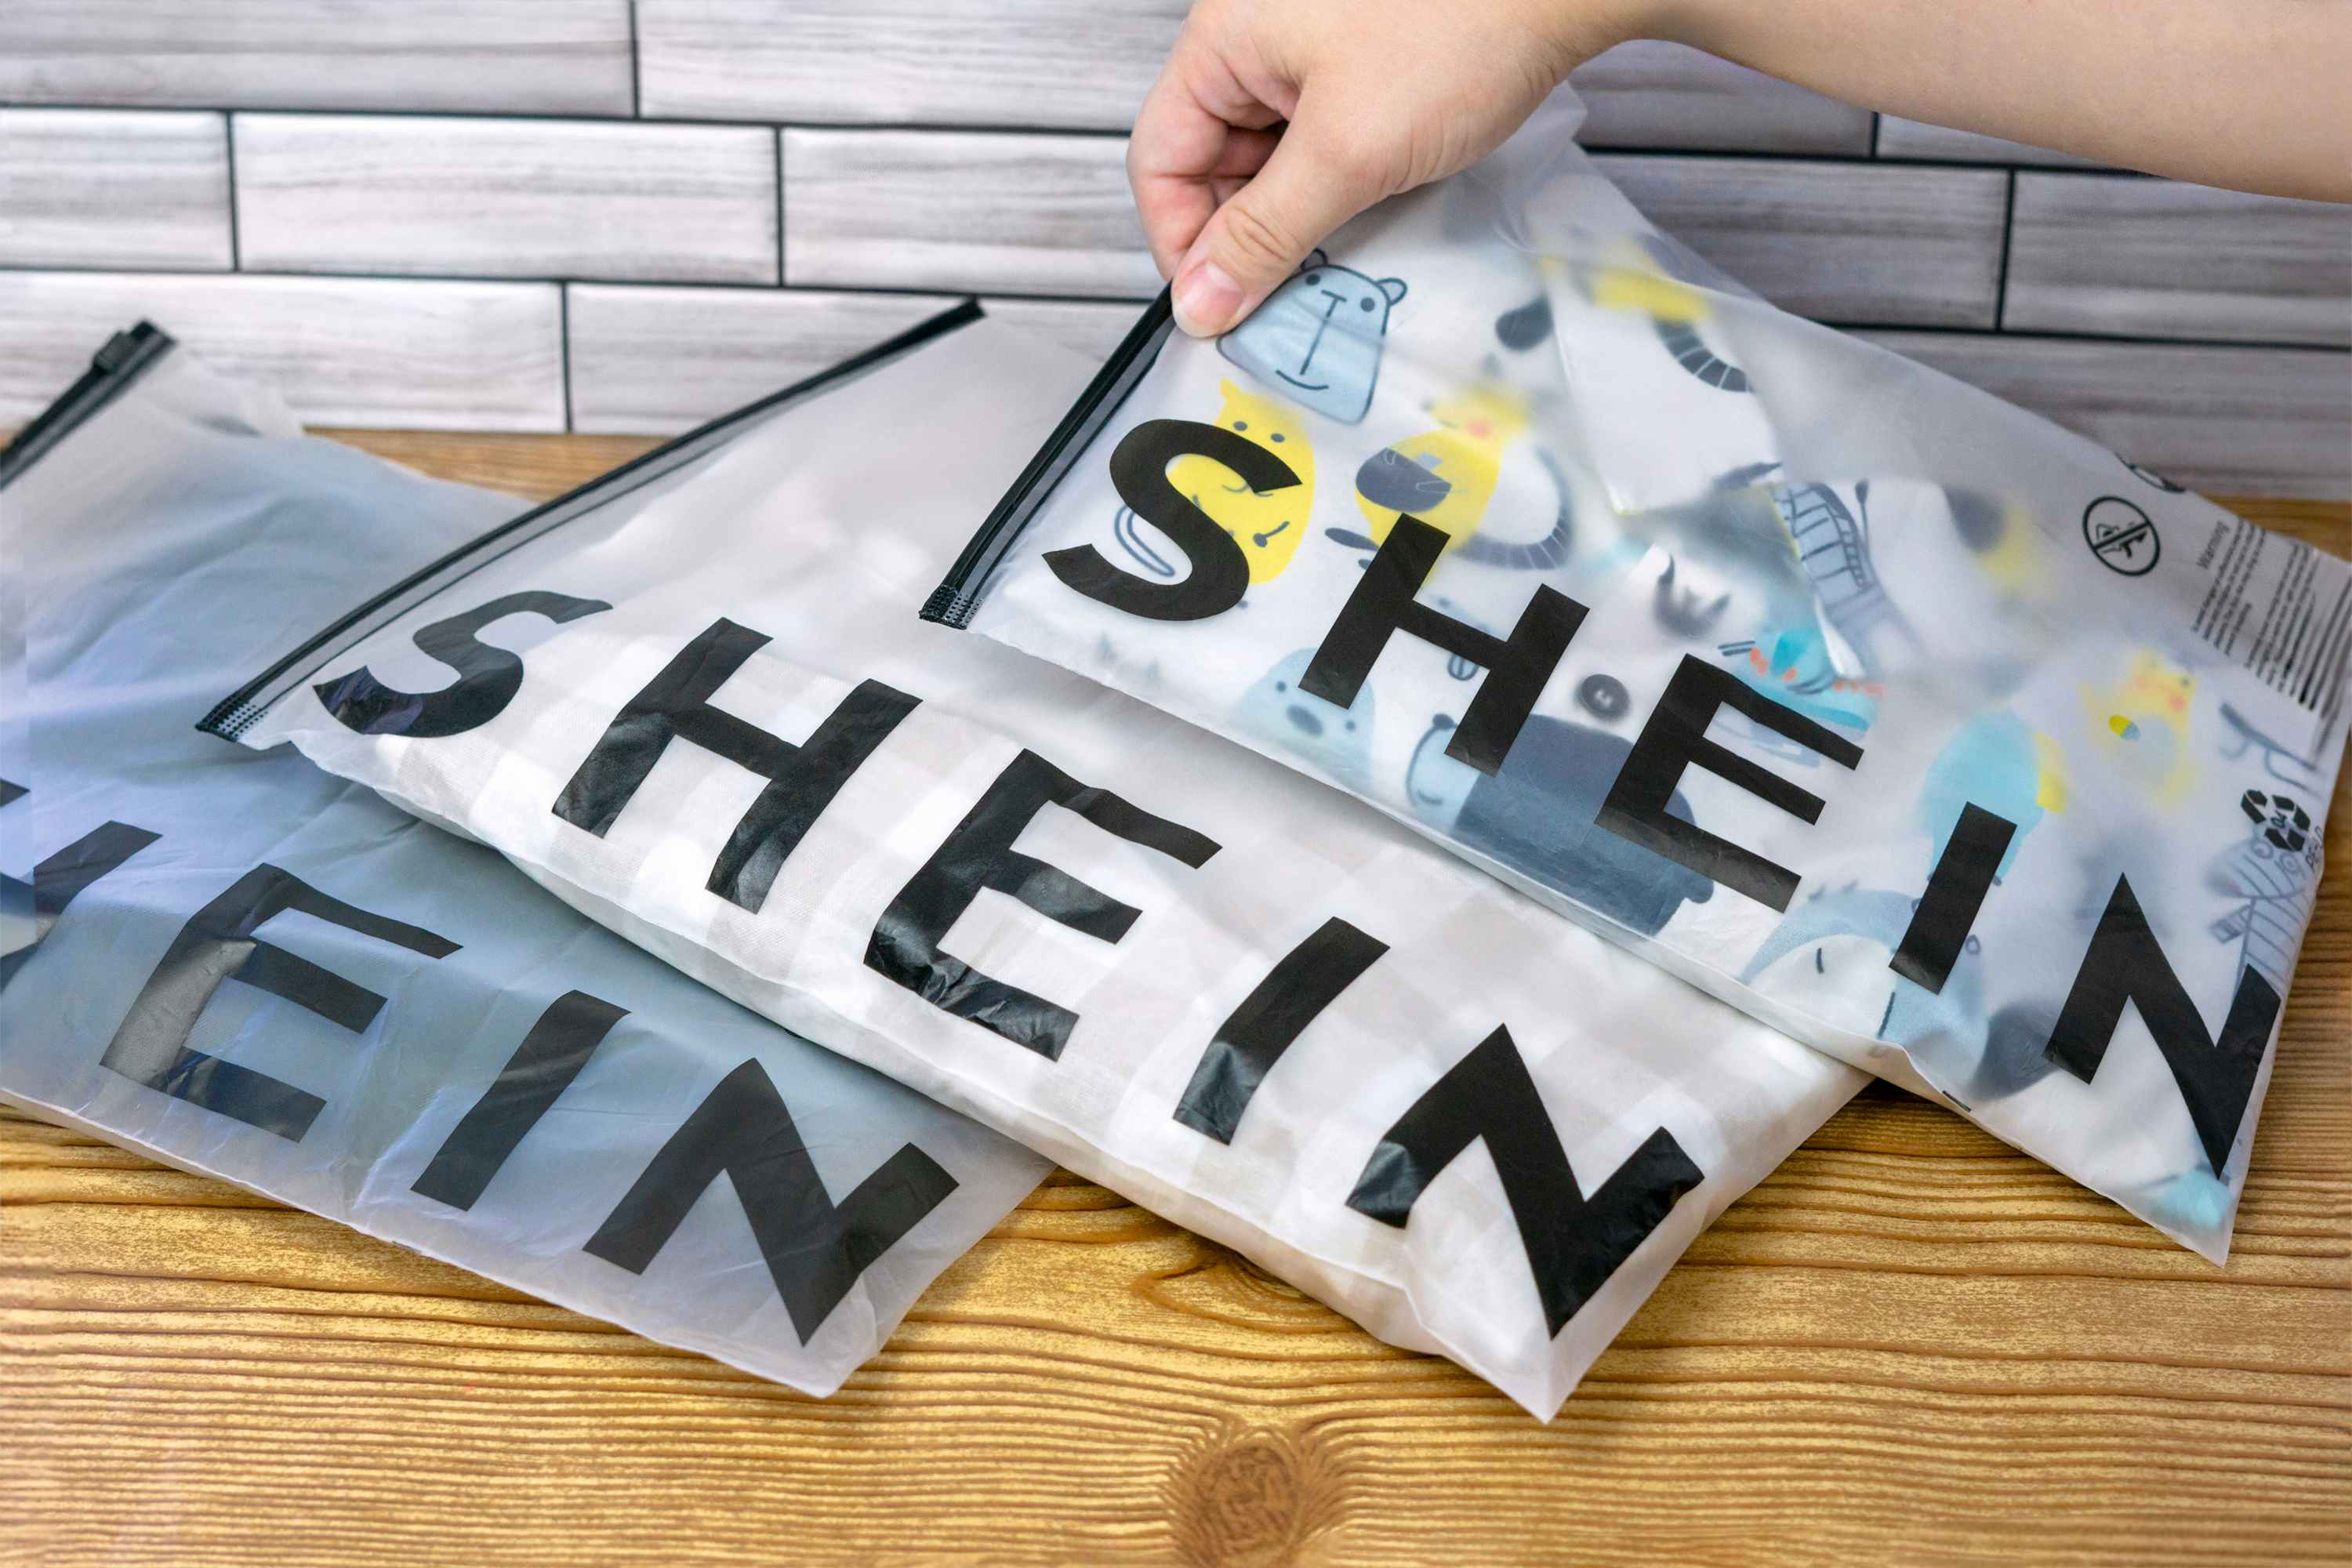 SheIn Exchange: 10 Things to Know First - The Krazy Coupon Lady